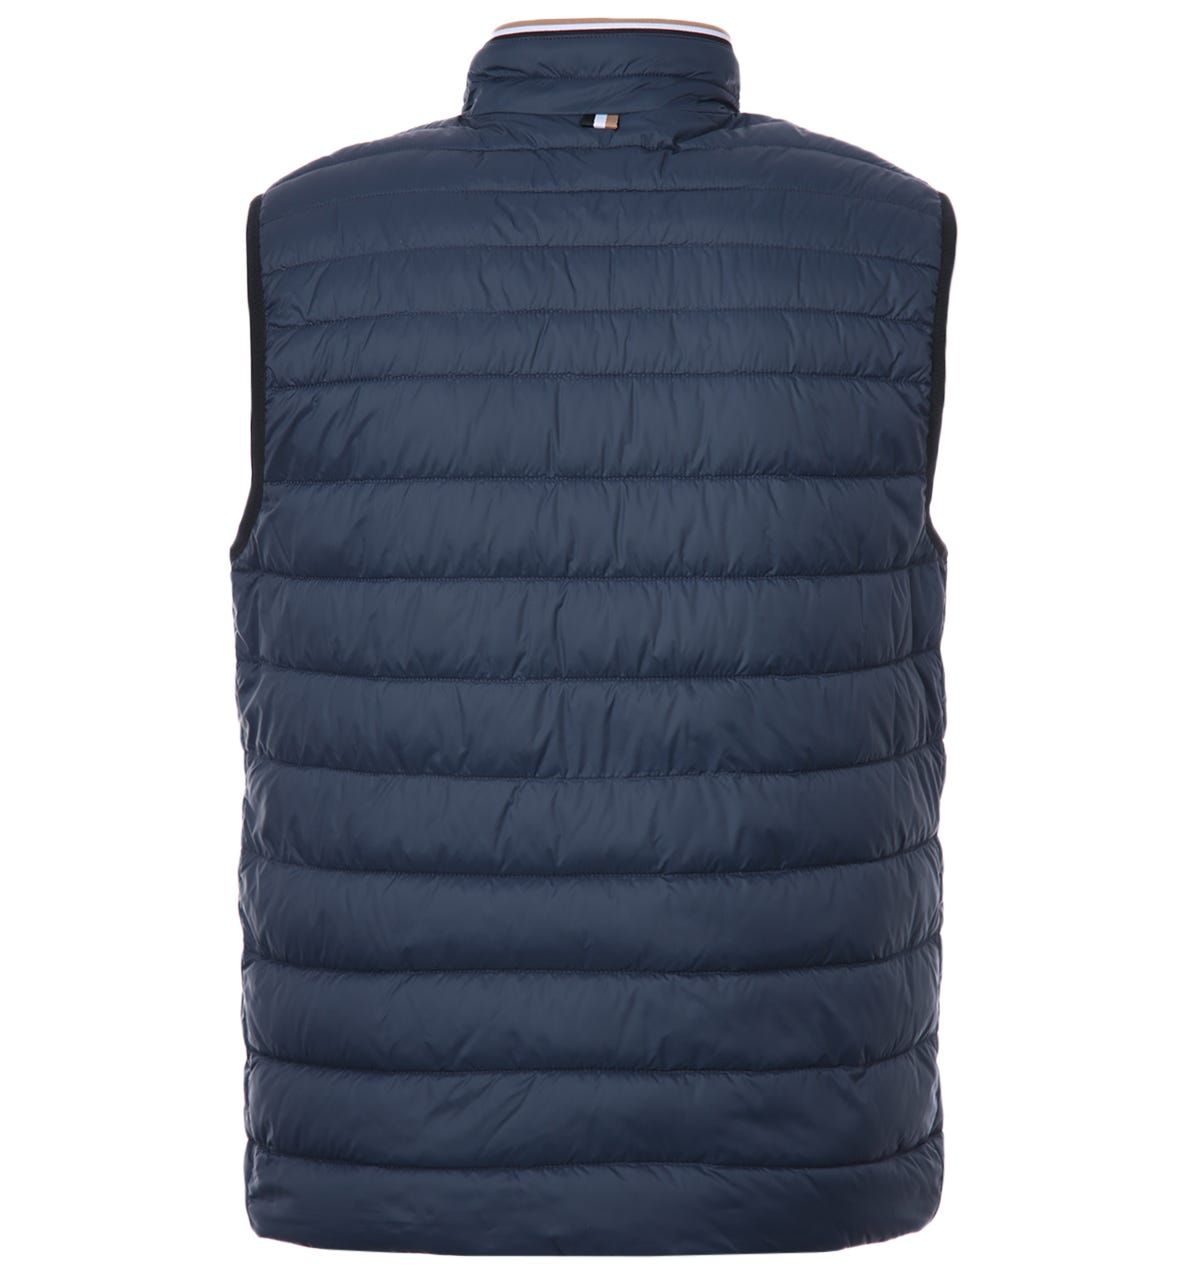 This water repellent packable down gilet from BOSS is the perfect piece to elevate your outerwear and stay warm this season. Crafted from a water repellent recycled polyamide providing comfort and sophistication. Featuring a stand up collar with brand colours, elasticated trims and functional welt snap button pockets. Finished with subtle BOSS branding.Regular Fit, Stand Collar with Full Zip Closure, Recycled Nylon, Water Repellant, Twin Snap Button Welt Pockets, BOSS Branding. Style & Fit:Regular Fit, Fits True to Size. Composition & Care:100% Recycled Polyamide, Machine Wash.